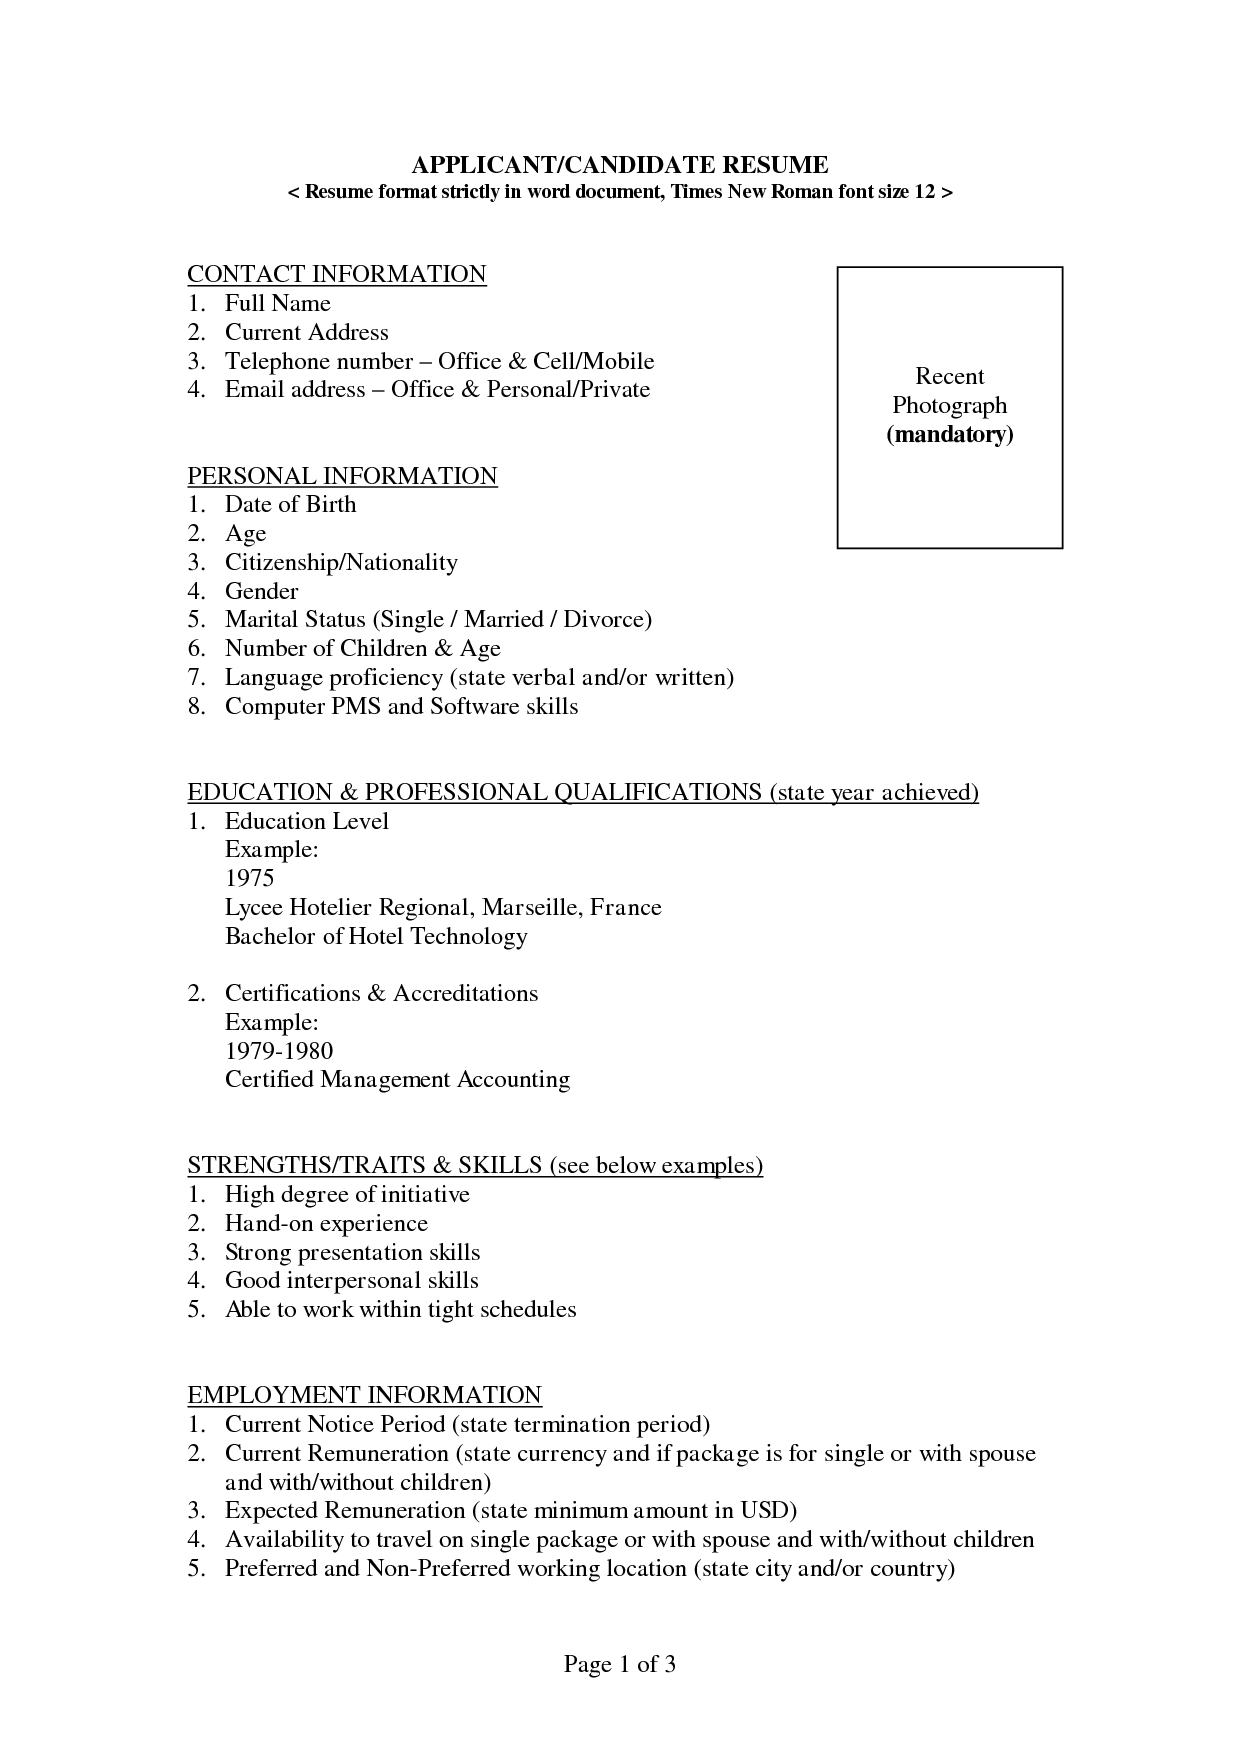 Free Blank Resume Templates For Microsoft Word | Resume With Regard To Free Blank Resume Templates For Microsoft Word